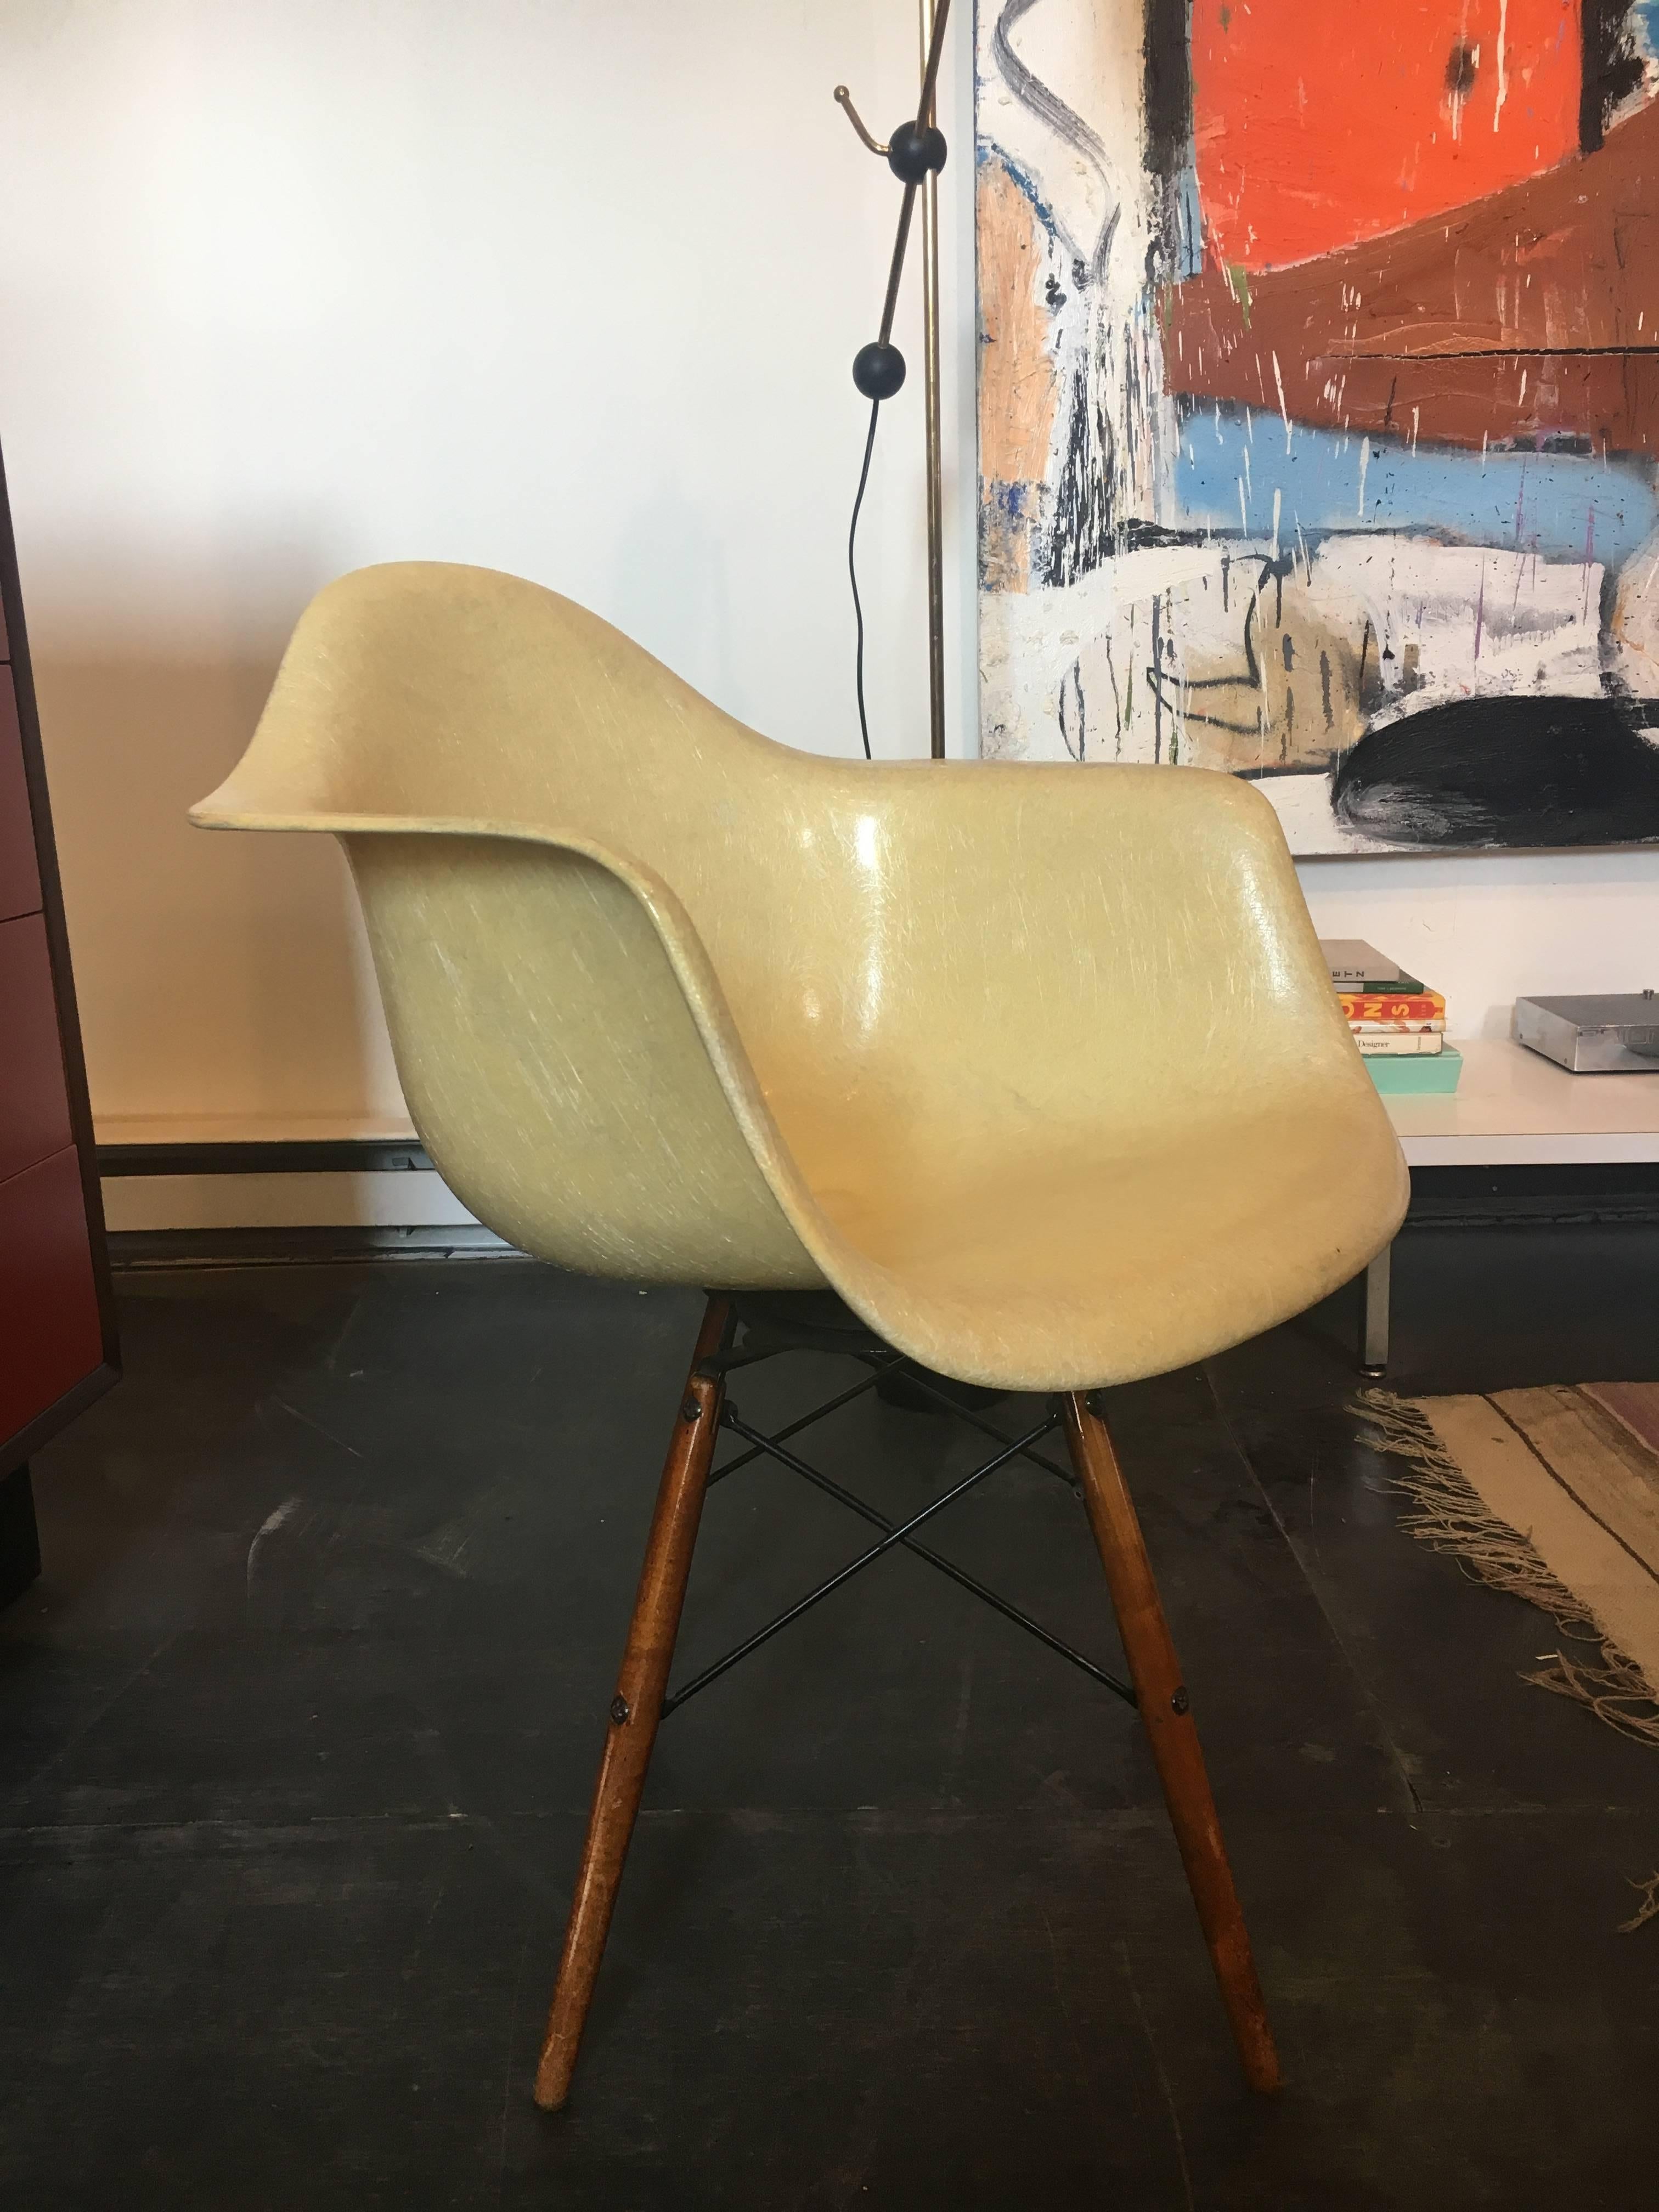 First generation 1949-1950 PAW rope swivel chair designed by Charles & Ray Eames produced by Zenith Herman Miller. Parchment color, dowel legs in birch, swivel dowel base, fiberglass shell with rope edge in parchment yellow (faded), aged in a good